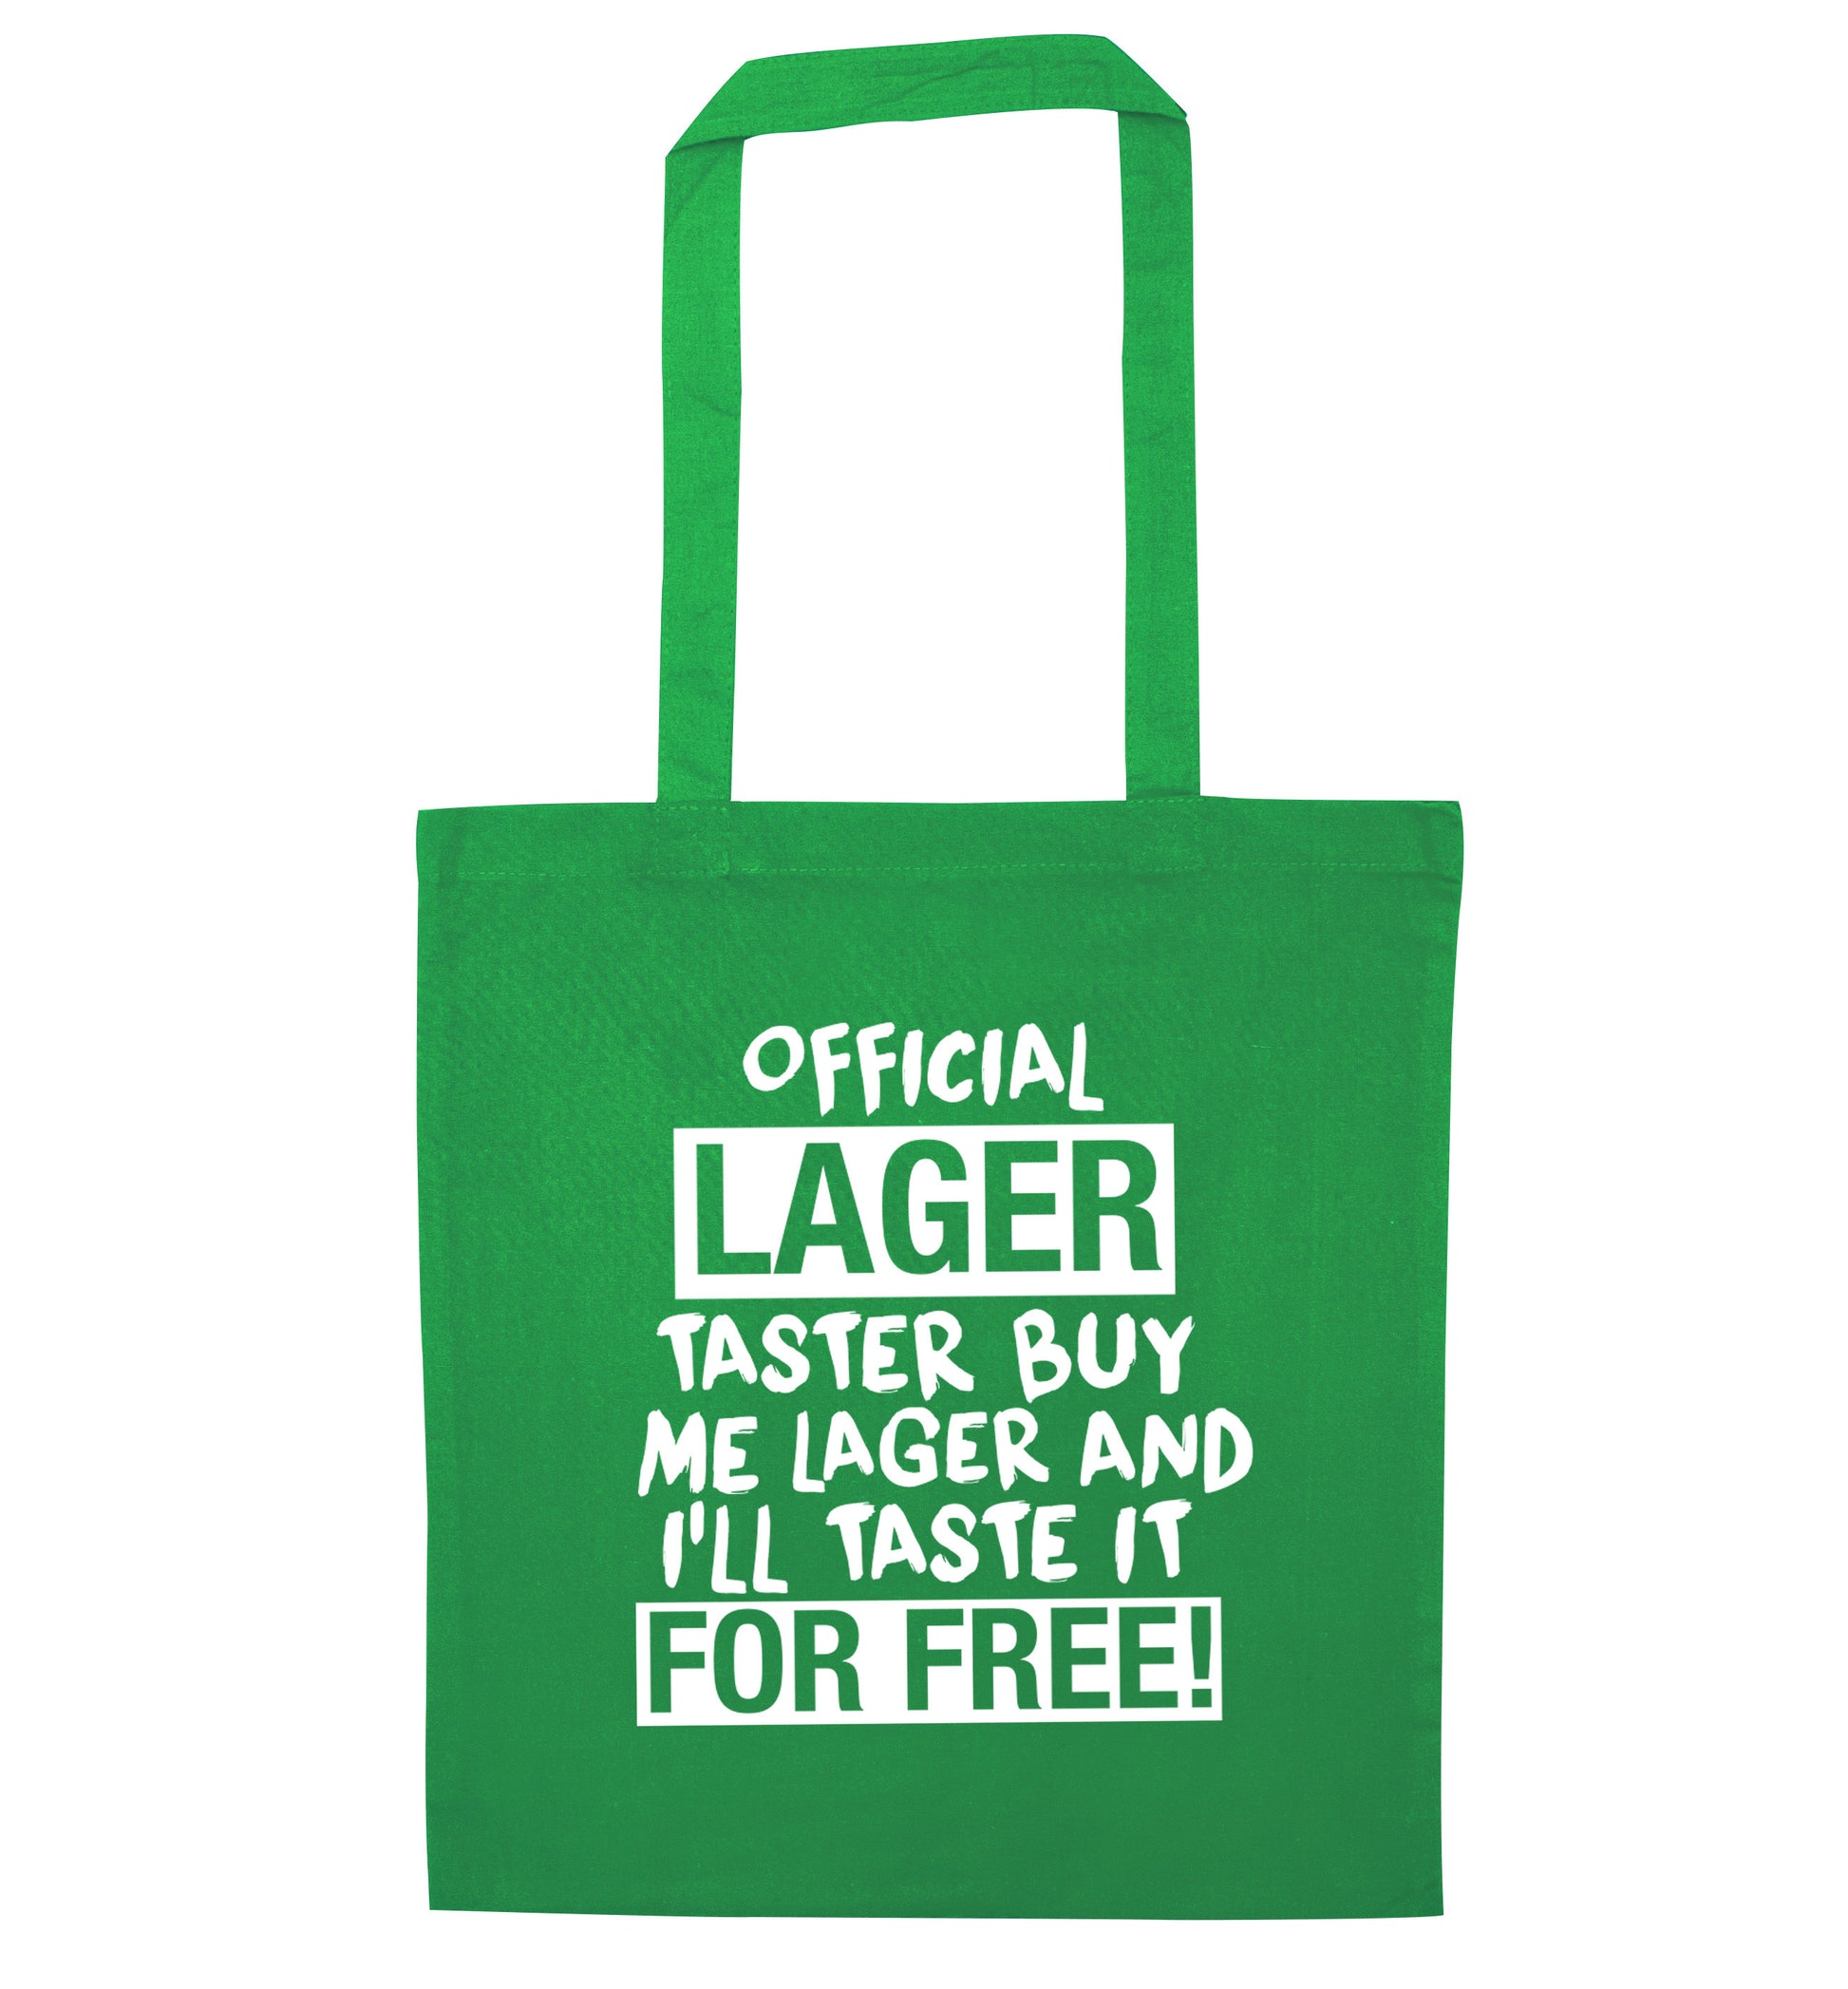 Official lager taster buy me lager and I'll taste it for free! green tote bag